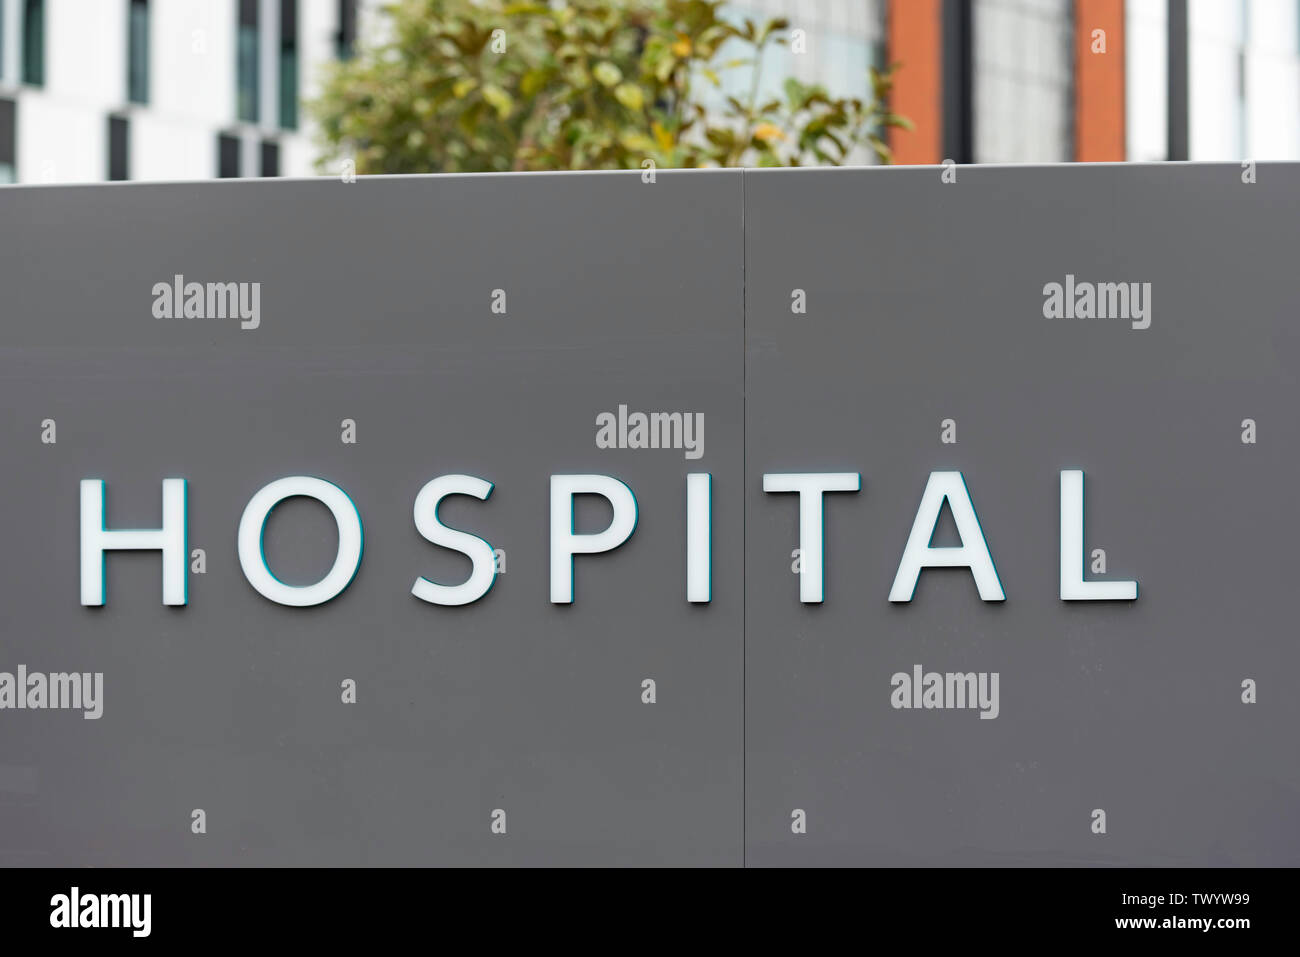 The word Hospital written in white capital letters on a grey background Stock Photo